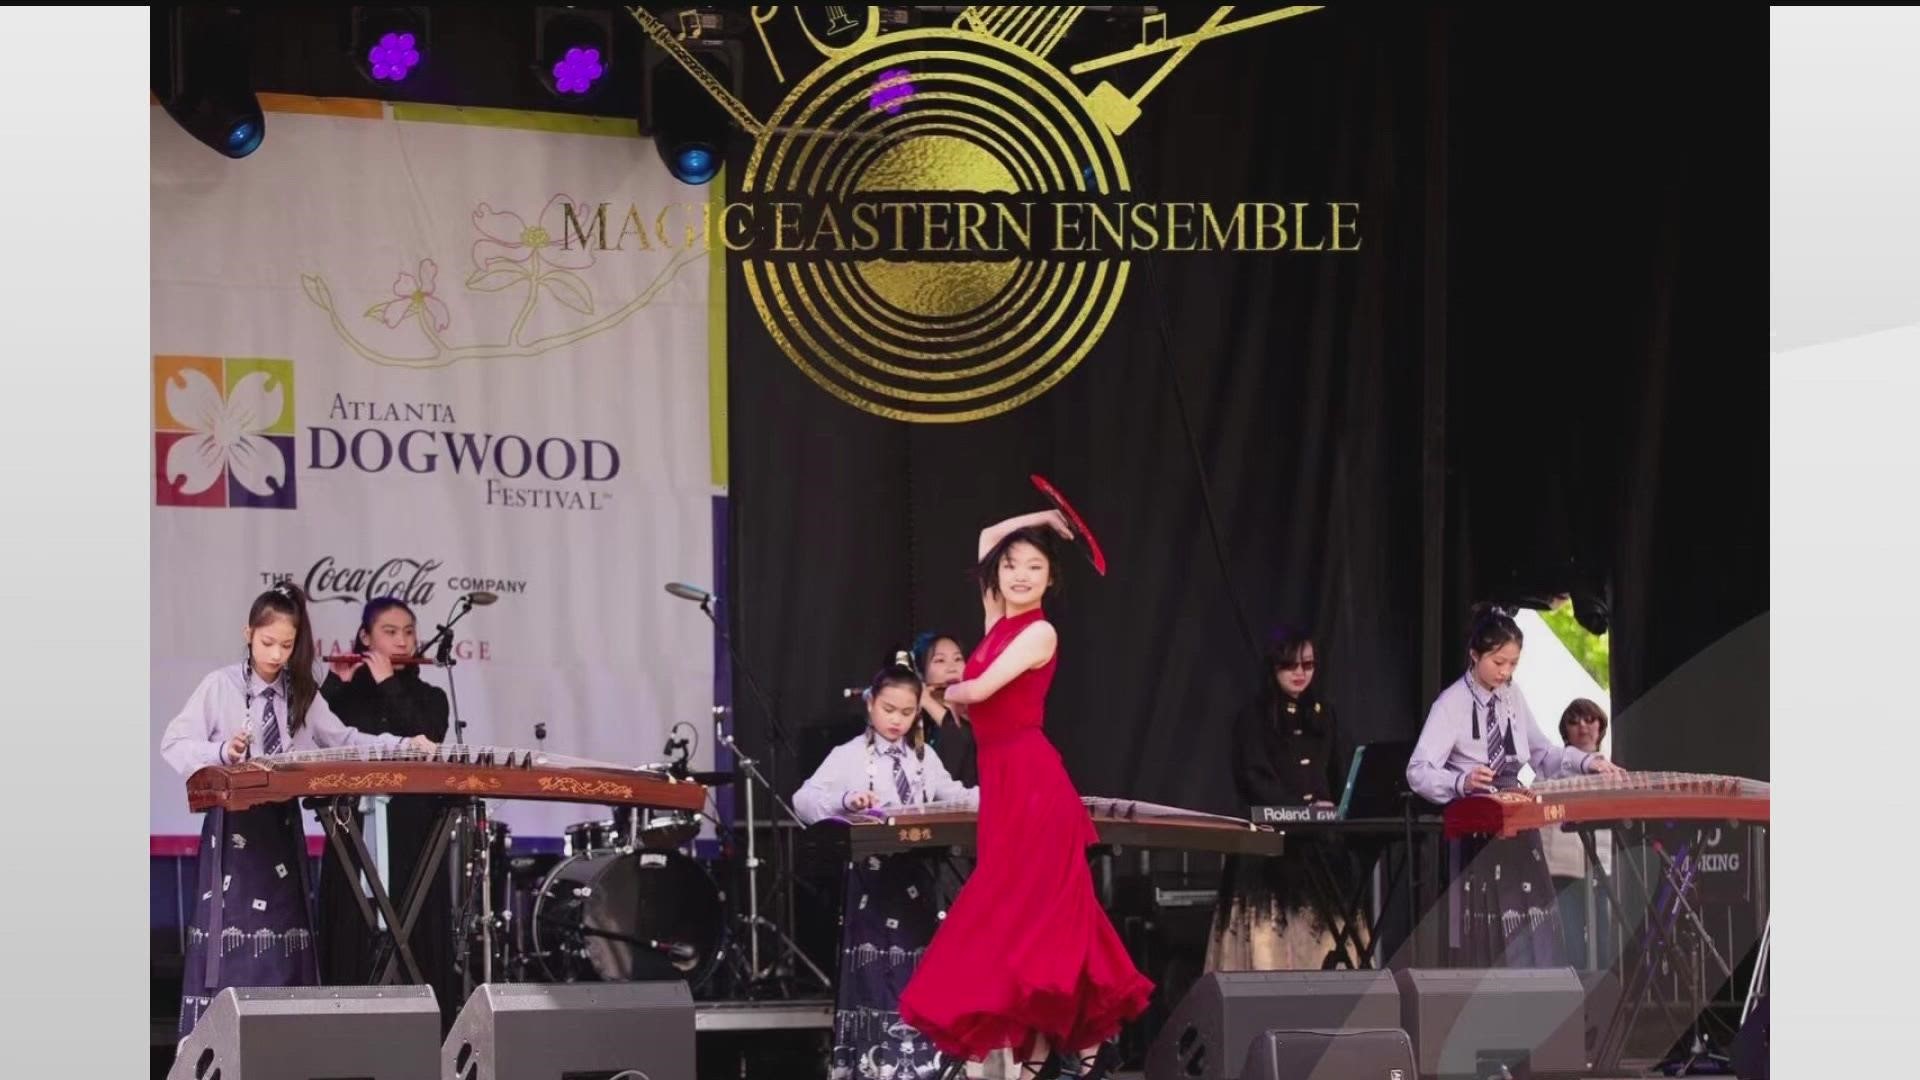 Yao Lu, who owns the Magic Eastern Music Studio and leads its performing ensemble, said that's the beauty of sharing her culture through music.